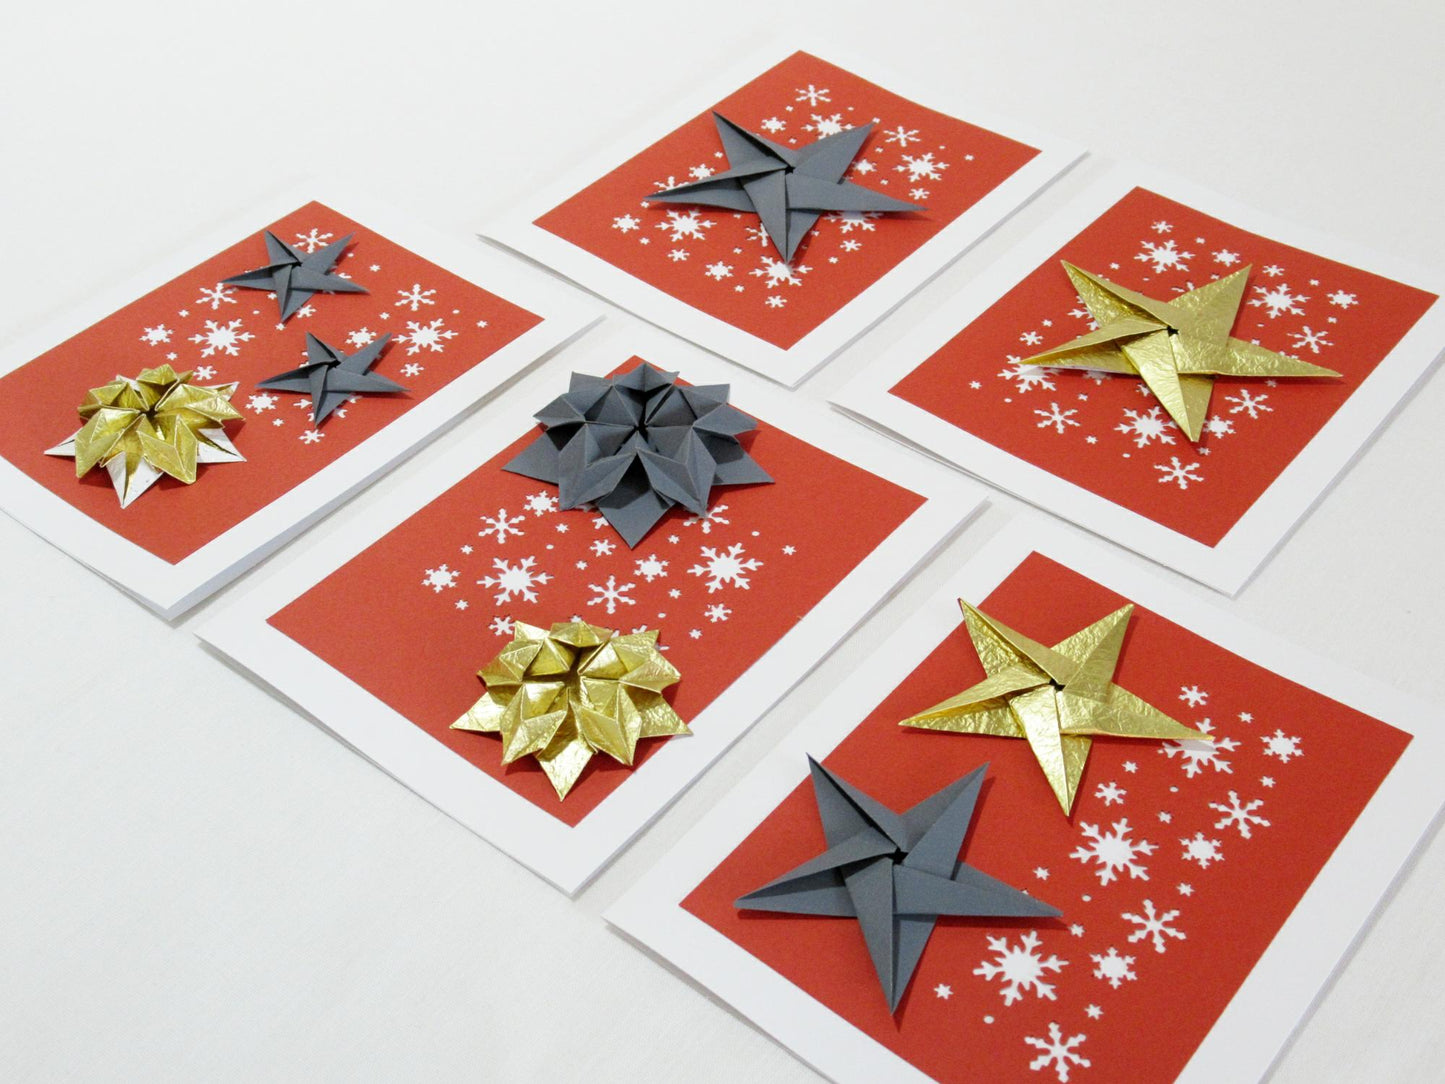 Set of five white cards. Each card has a red background with white snowflakes. On top are a variety of origami stars in both gold and grey.